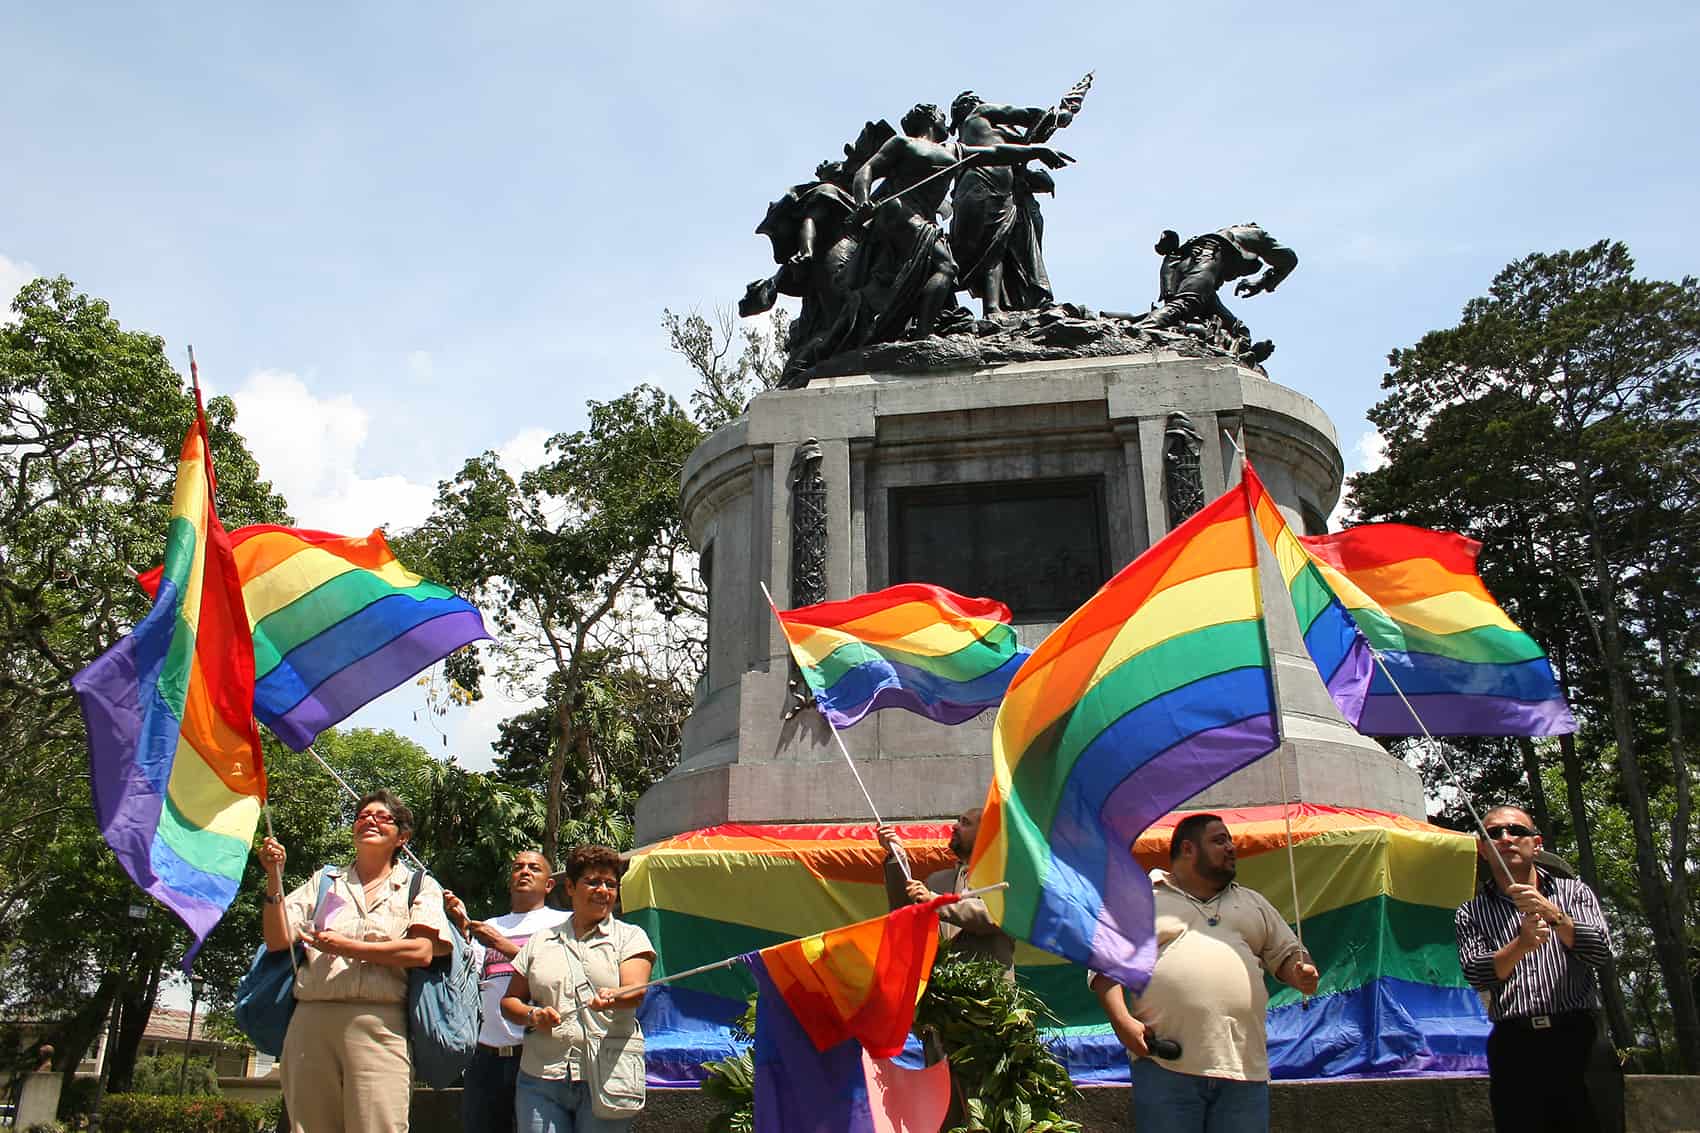 Costa Rican Schools To Observe National Day Against Homophobia The Tico Times Costa Rica